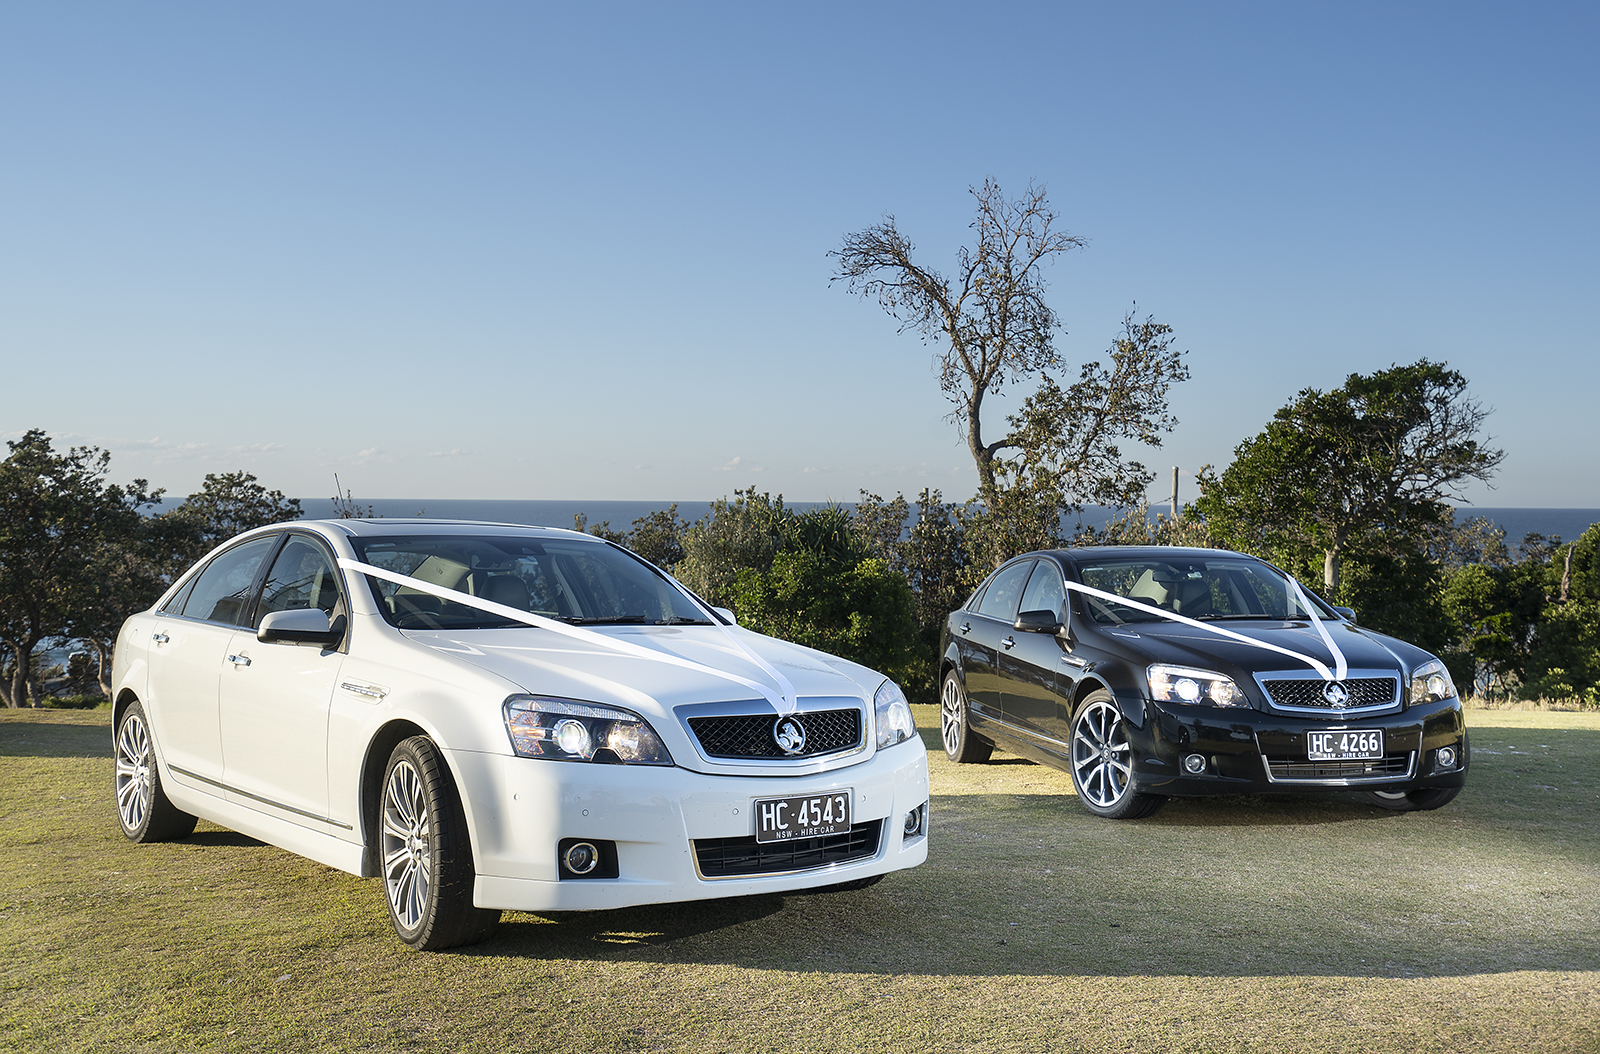 Holden Caprice V8
Sedan /
Gold Coast QLD, Australia

 / Hourly (Wedding) AUD$ 150.00
 / Hourly (Other services) AUD$ 150.00
 / Airport Transfer AUD$ 220.00
